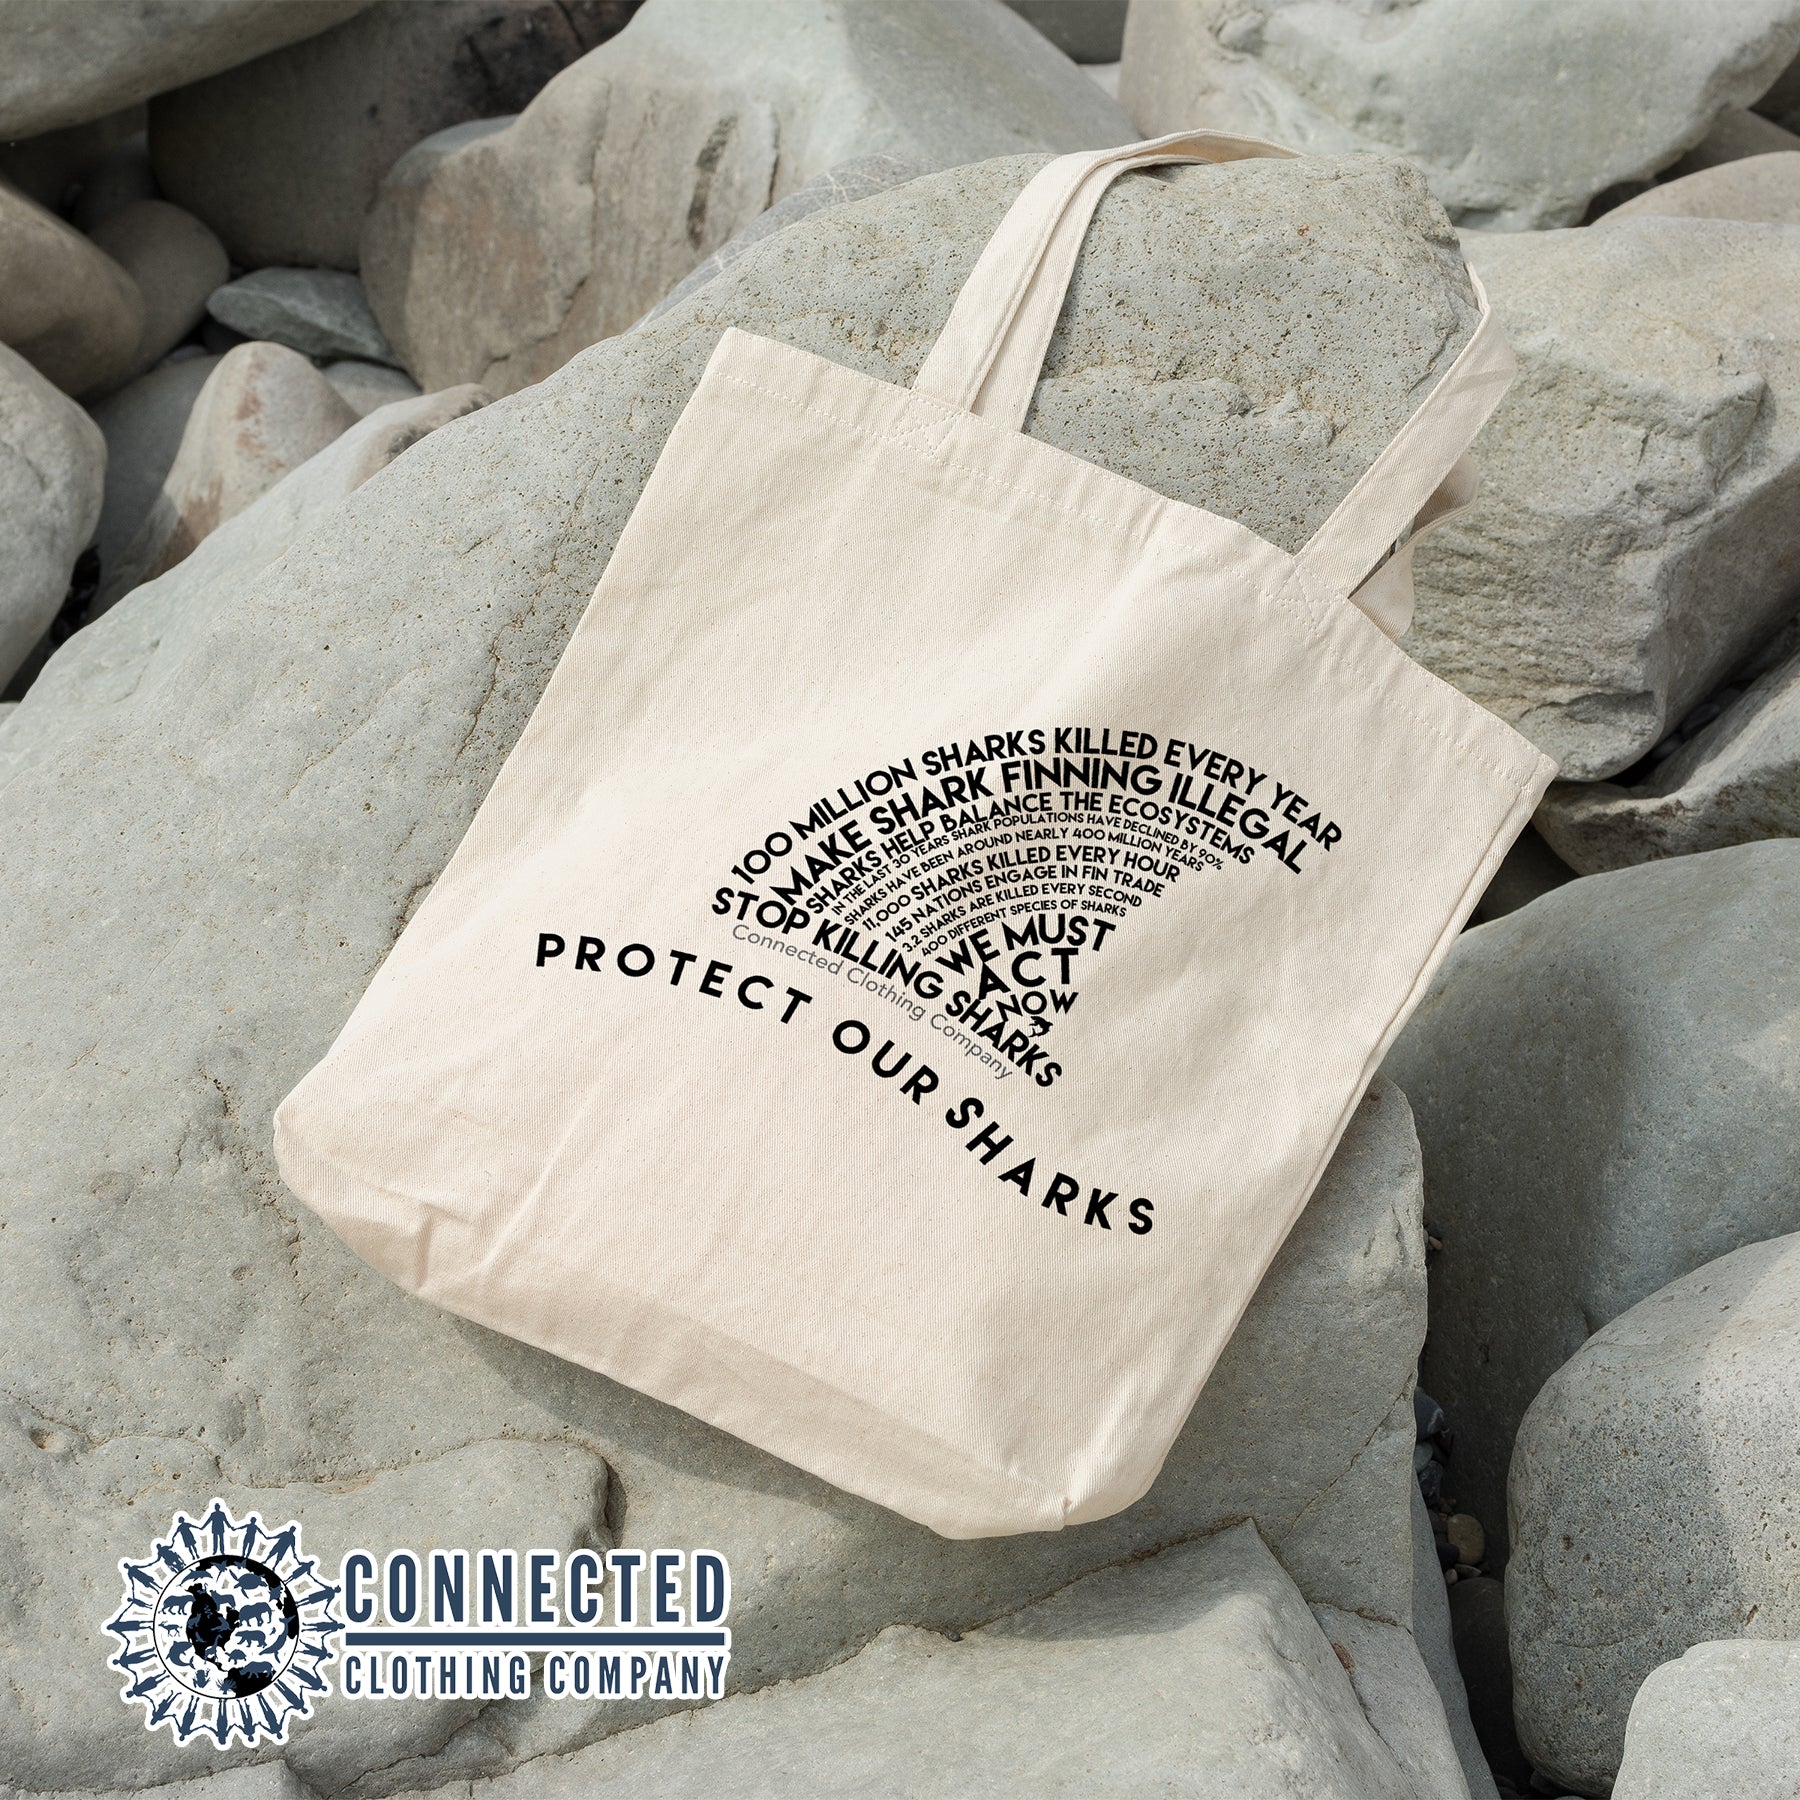 Protect Our Sharks Tote Bag - Connected Clothing Company - 10% of proceeds donated to Oceana shark conservation